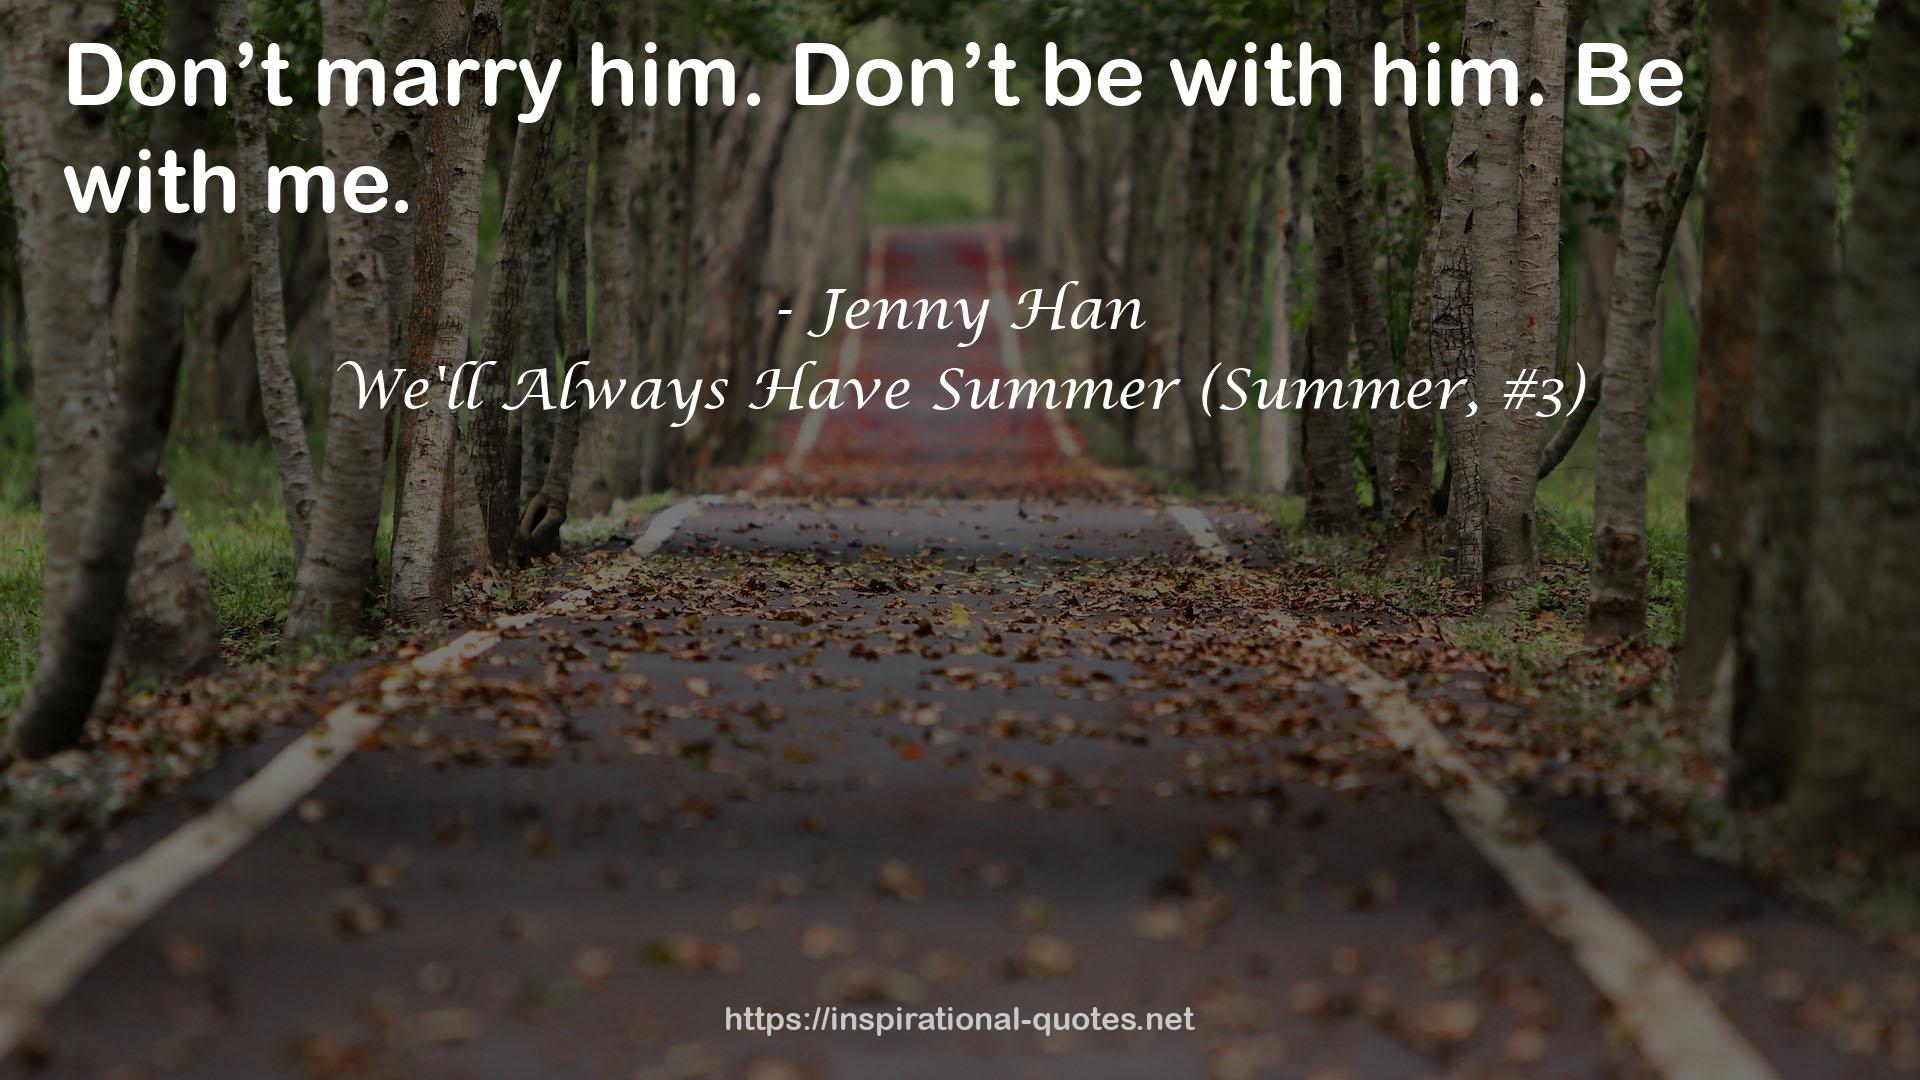 We'll Always Have Summer (Summer, #3) QUOTES